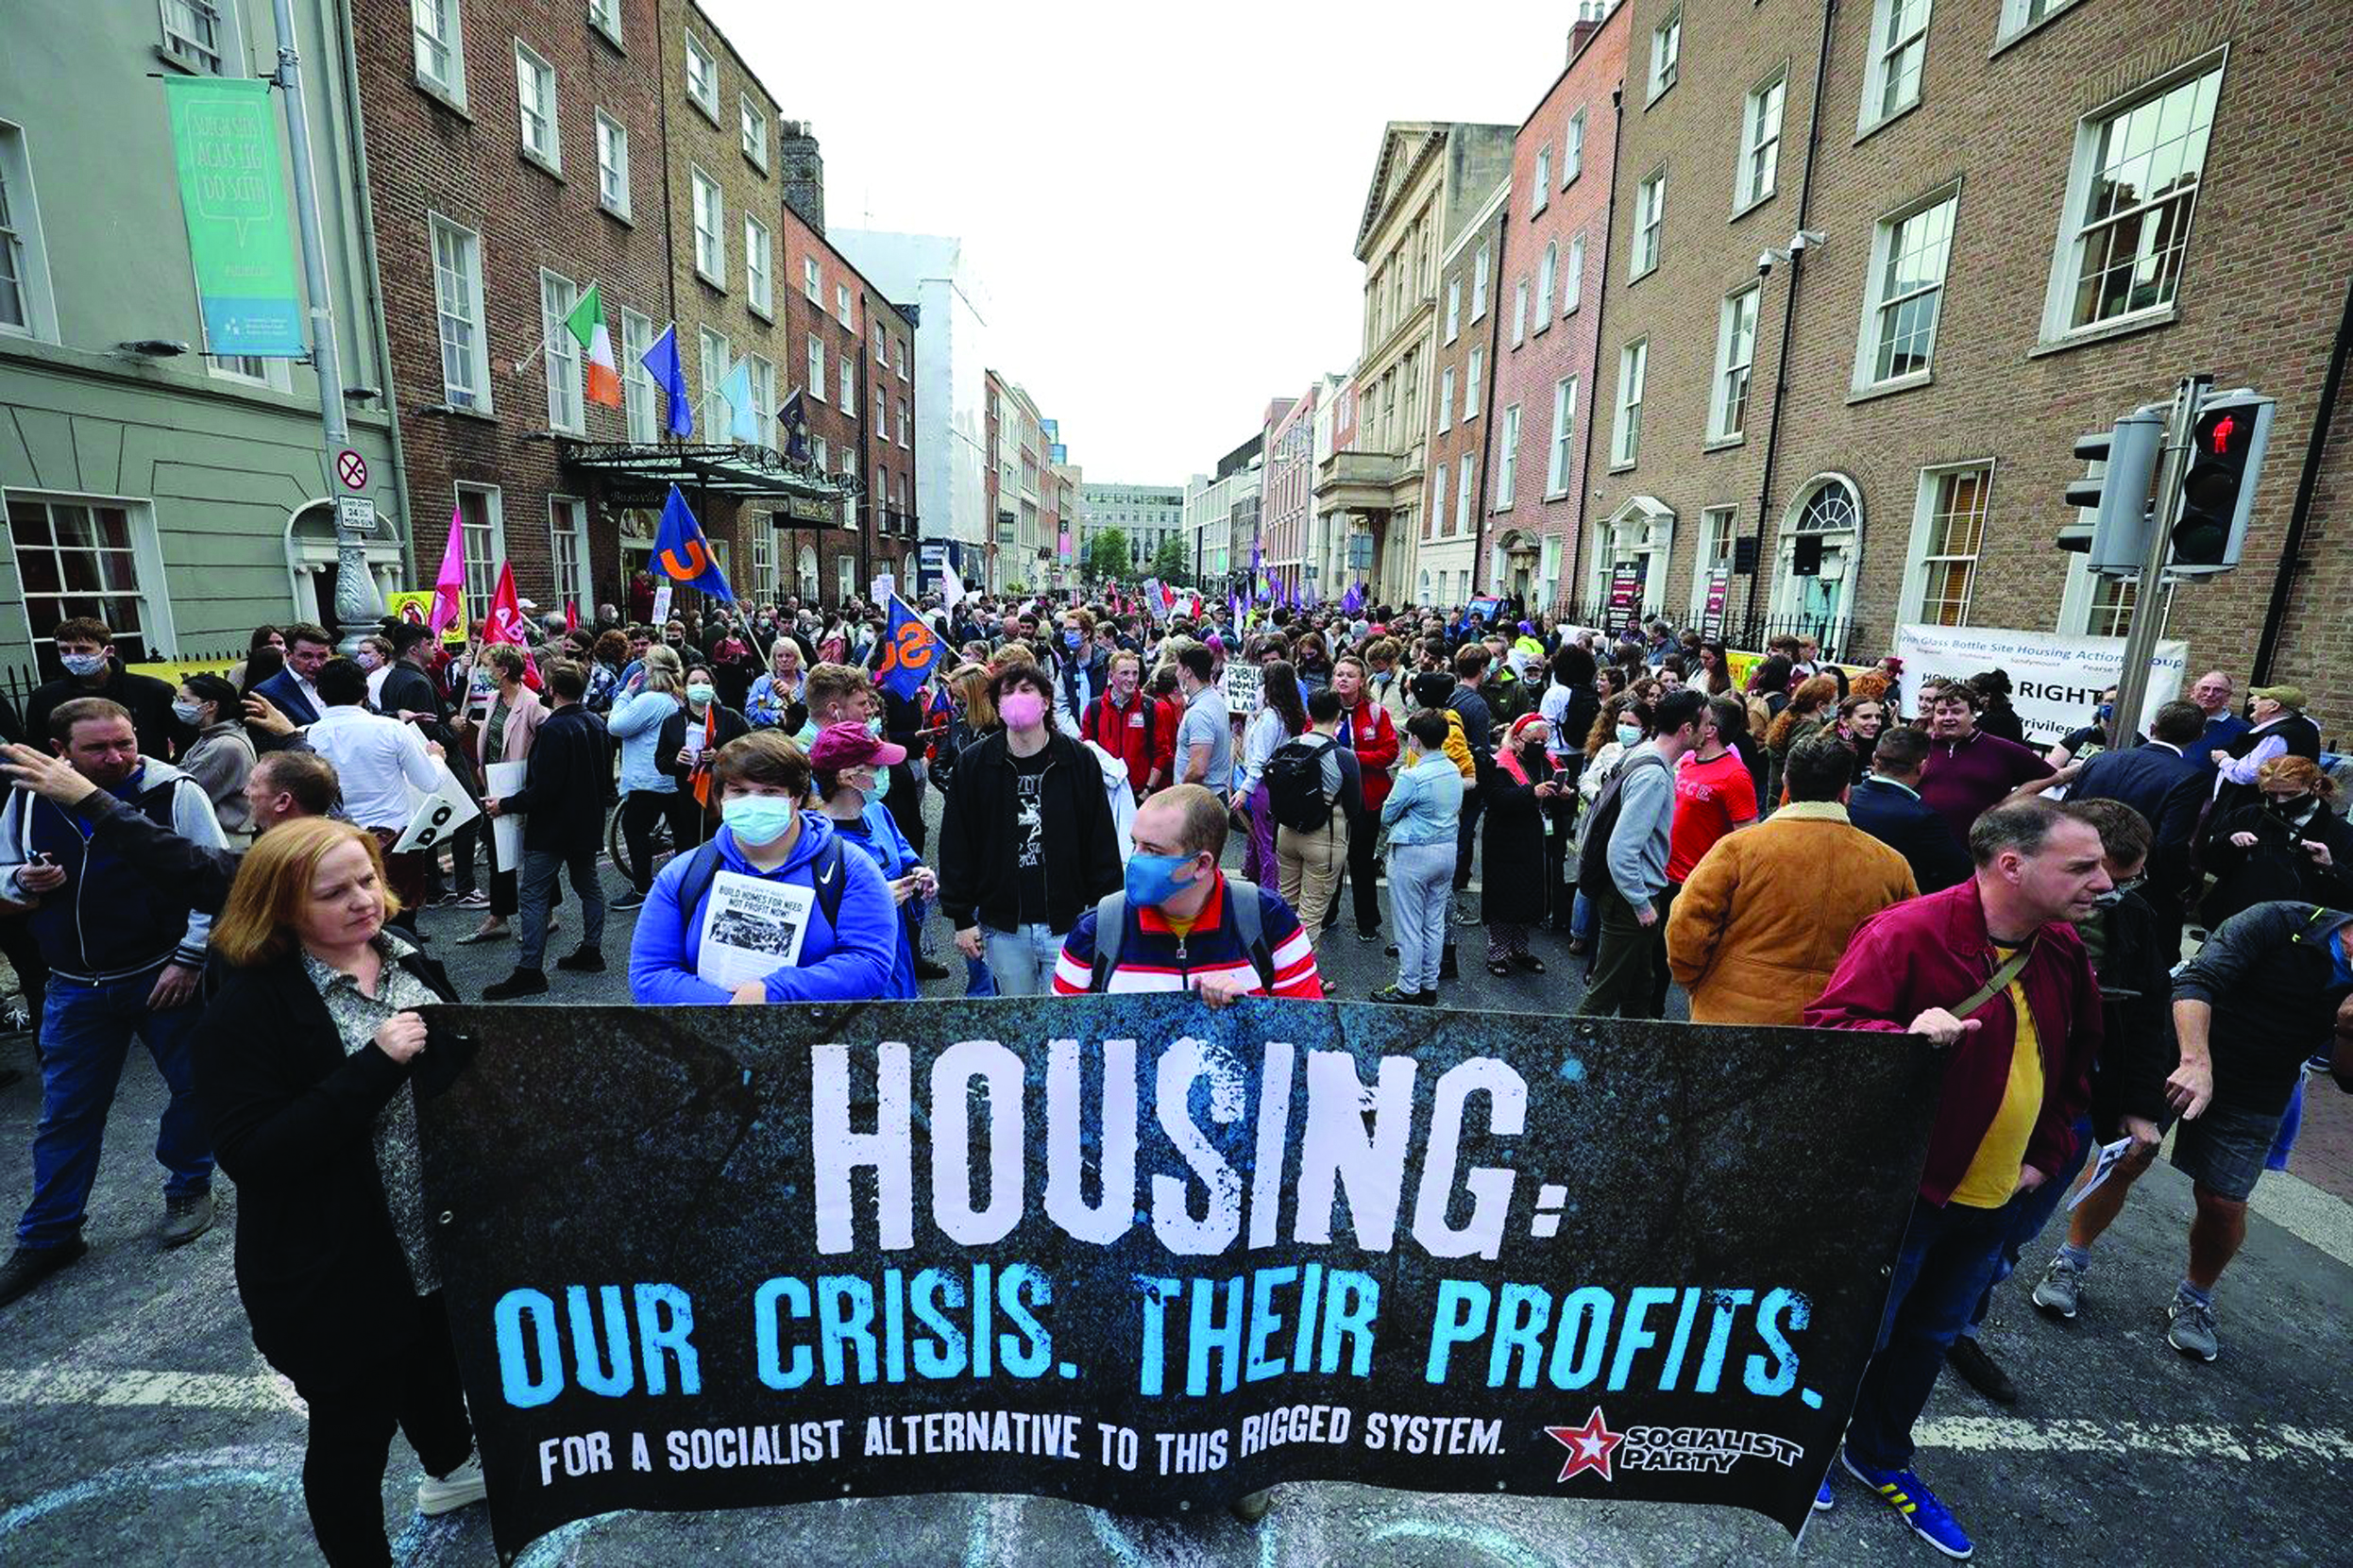 11,000 in emergency accommodation- Government housing policy in total shambles